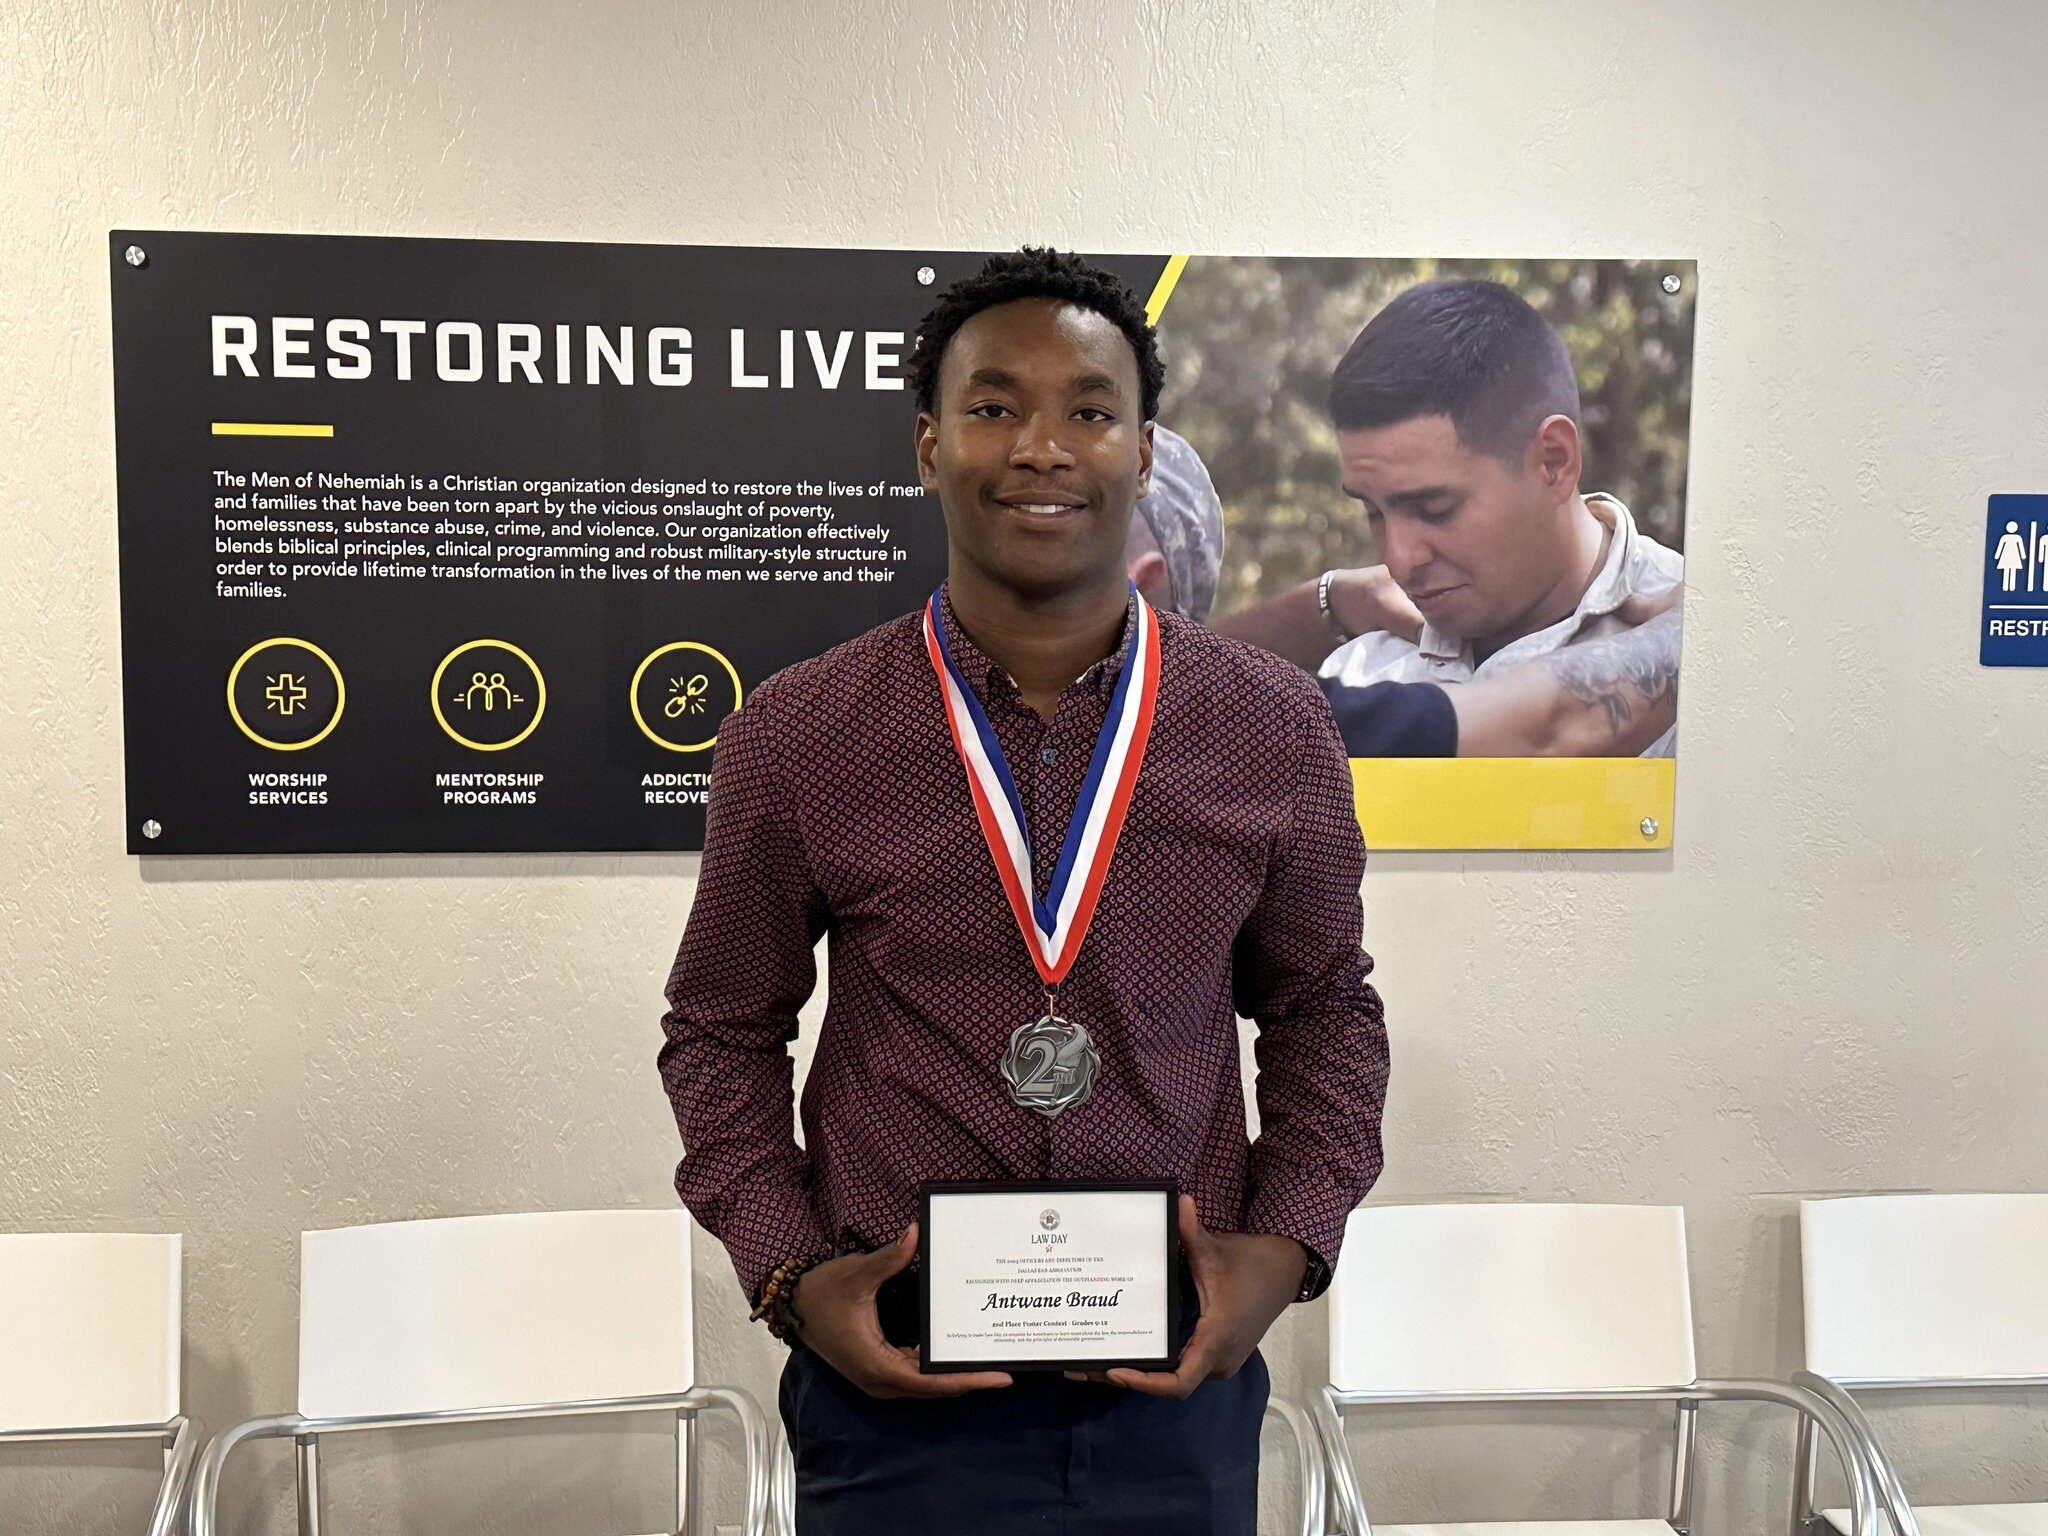 Congratulations, not only to graduating the program, but also getting your GED and being recognized for a special award! We see a bright future ahead